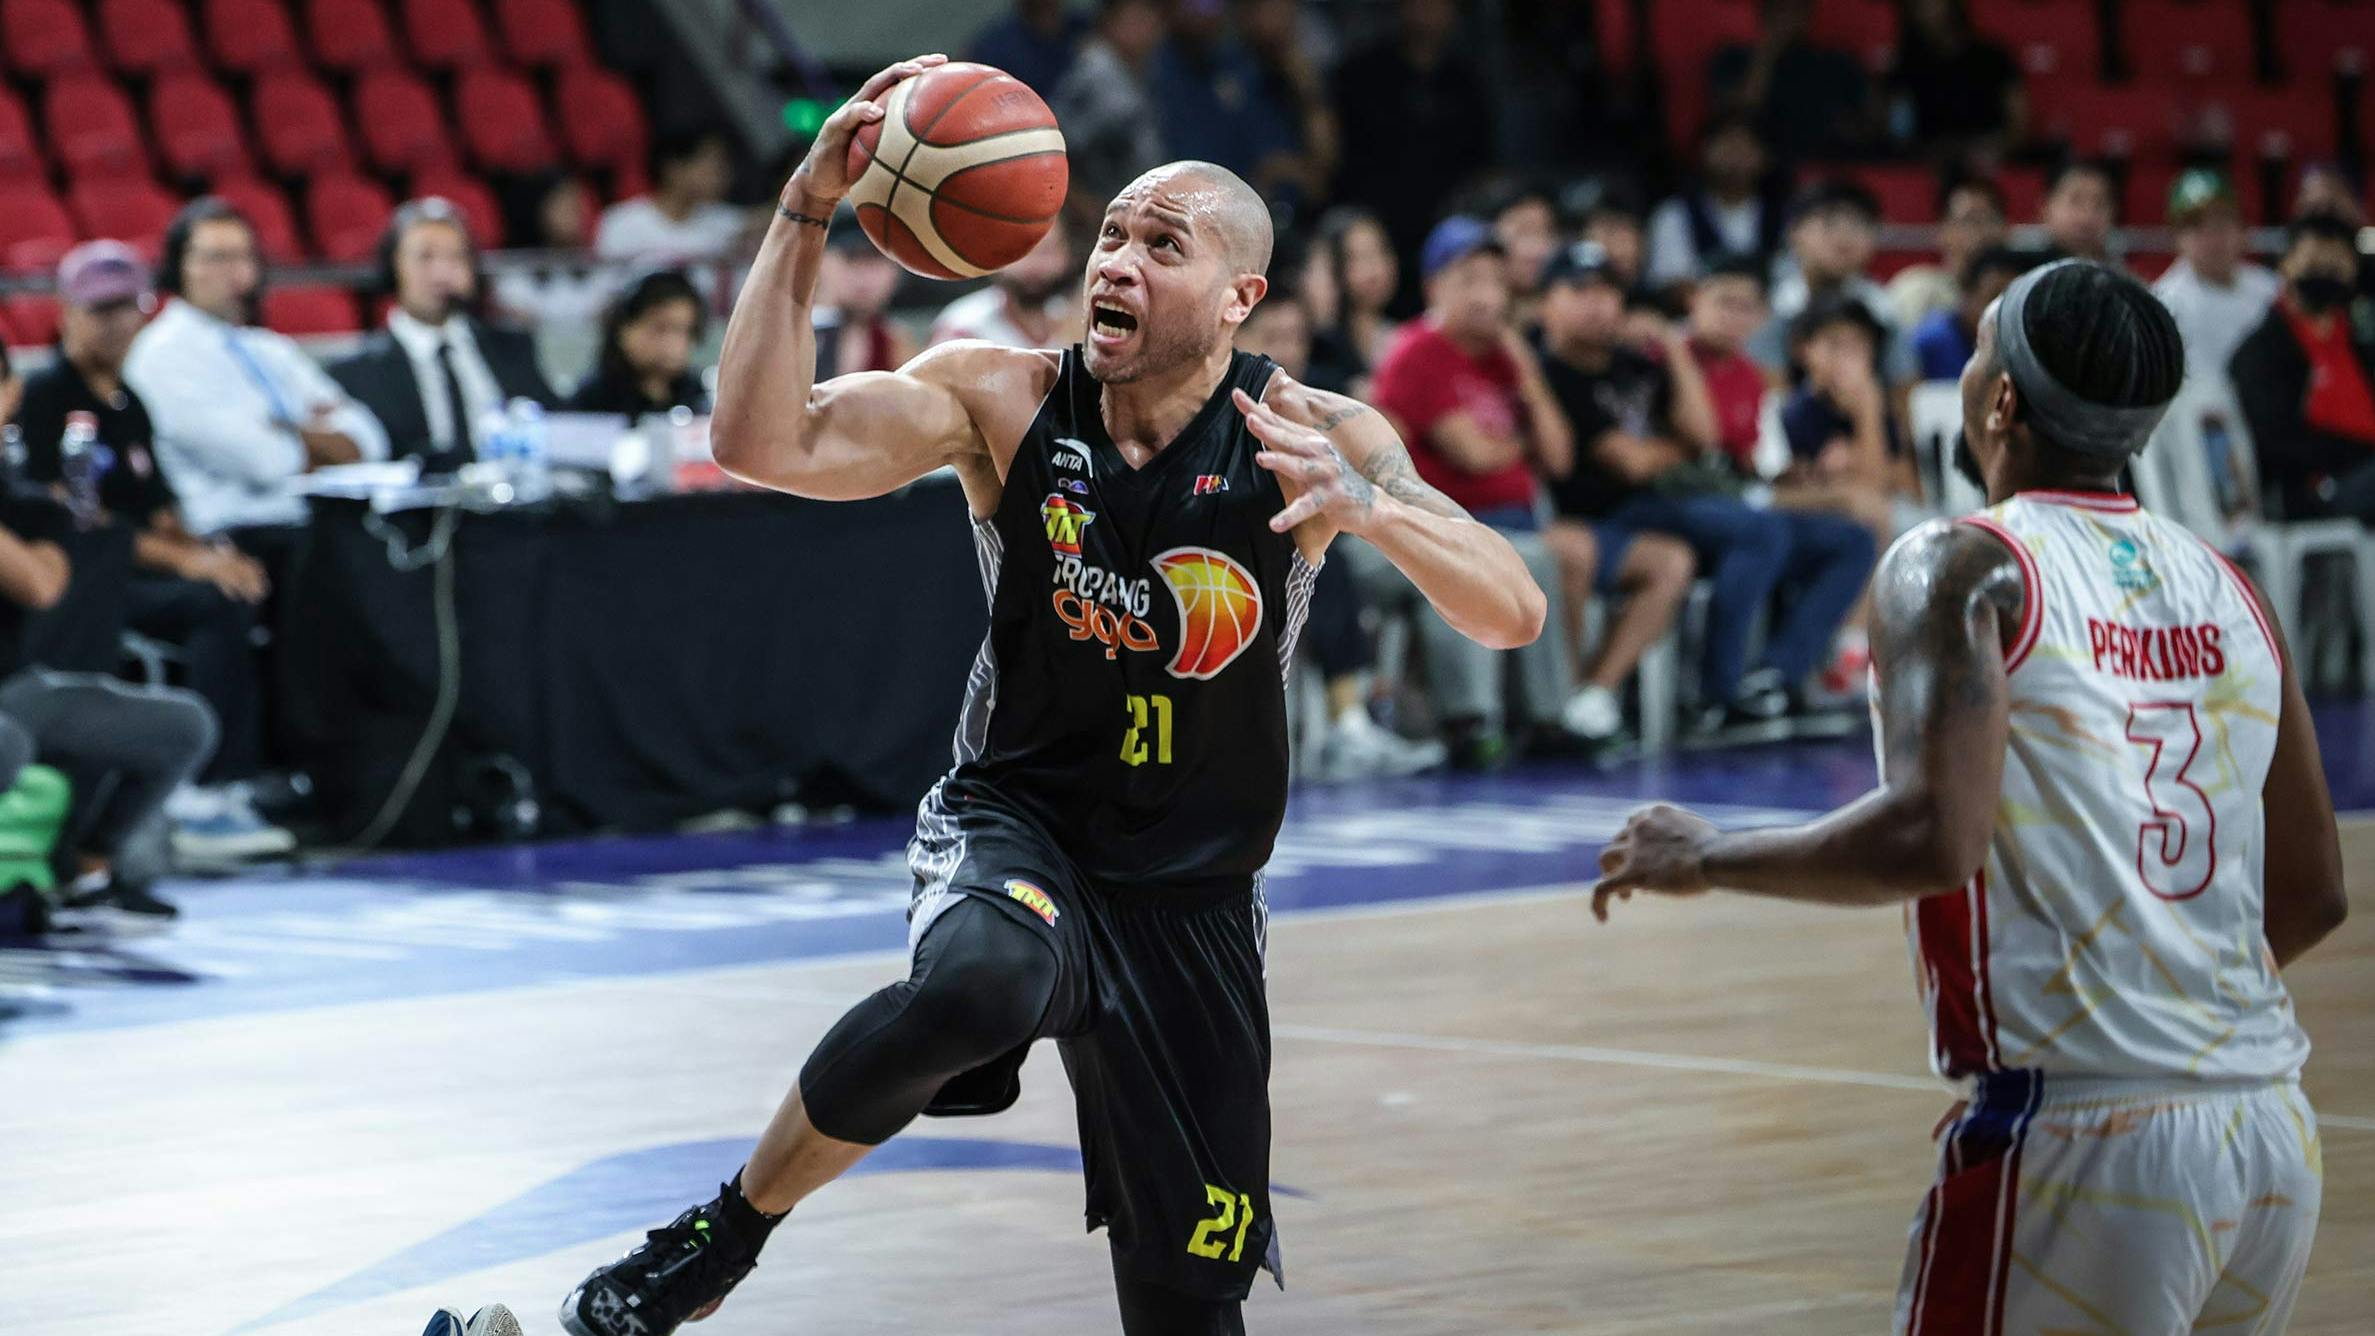 PBA: After shaky start to PH Cup, TNT vet Kelly Williams believes young team can get it together sooner than later